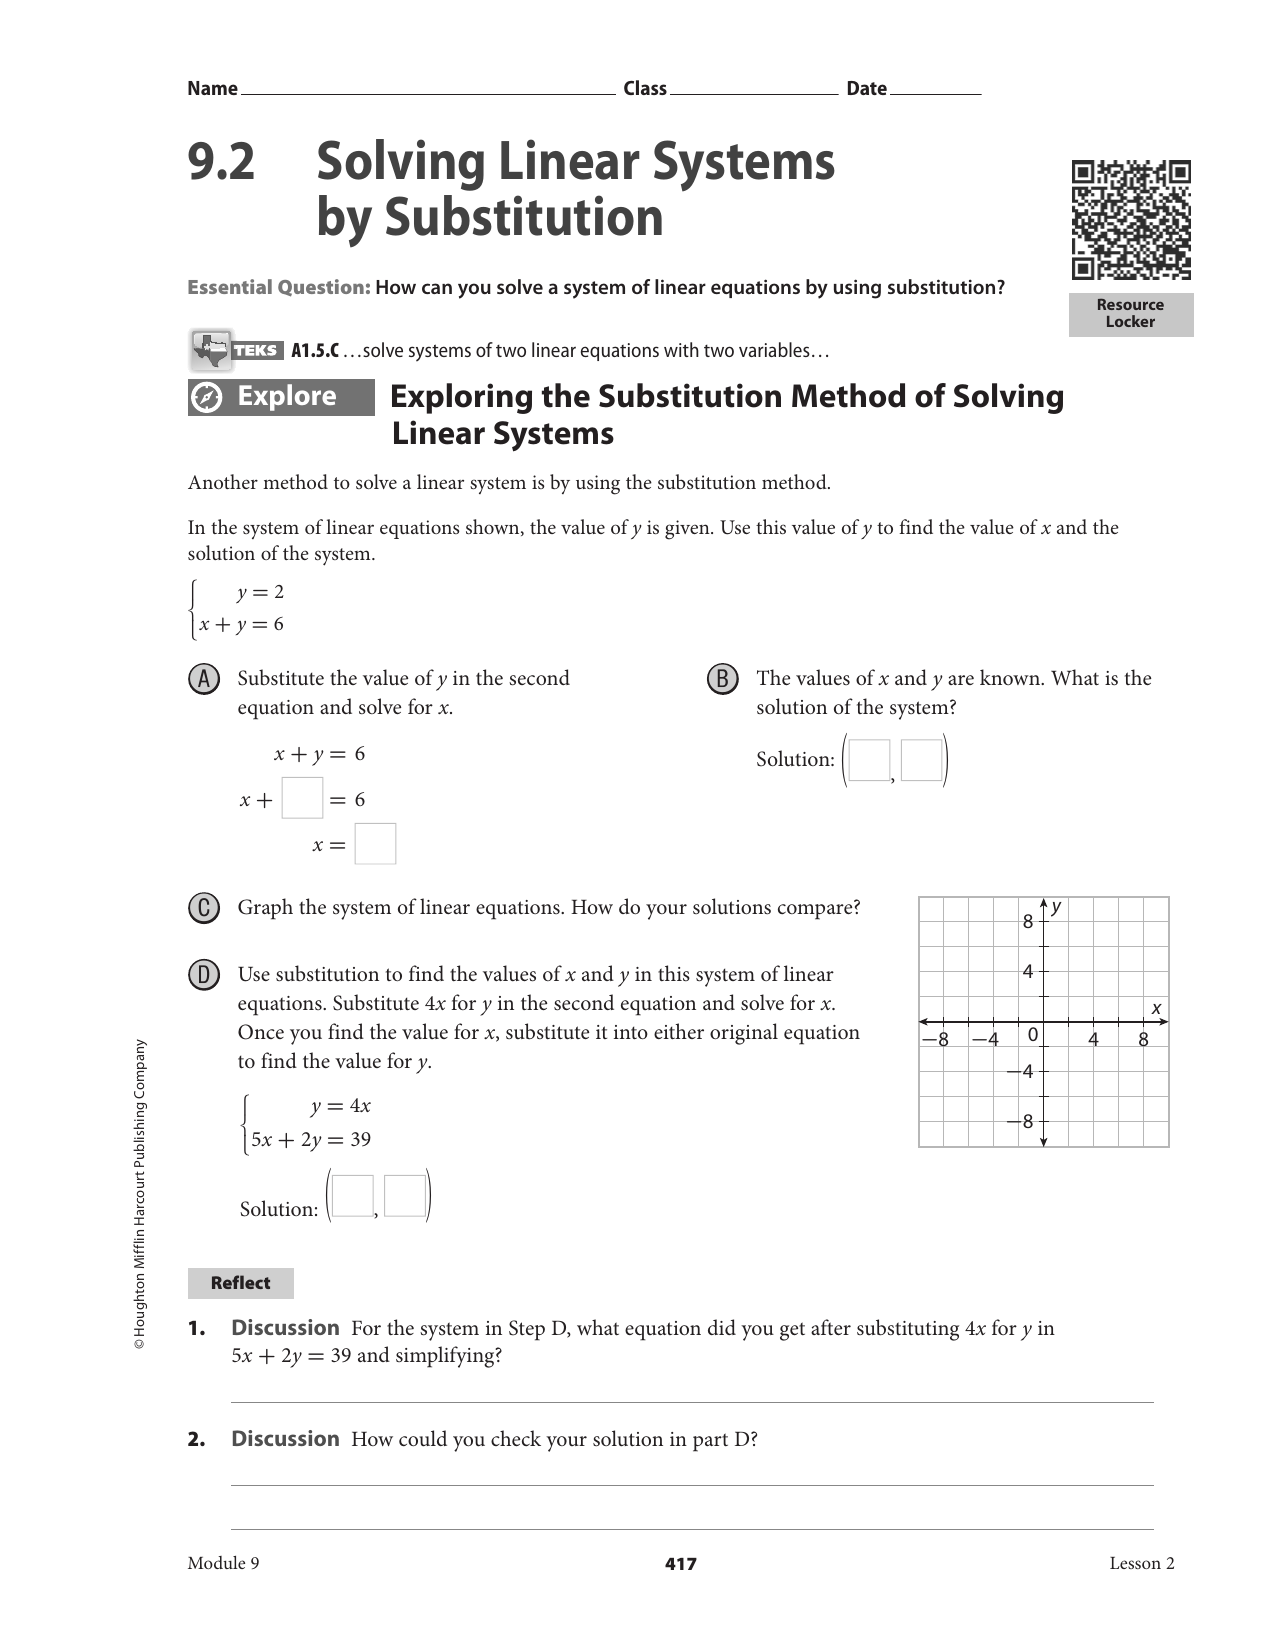 200 . 20 Solving Linear Systems by Substitution With Substitution Method Worksheet Answer Key